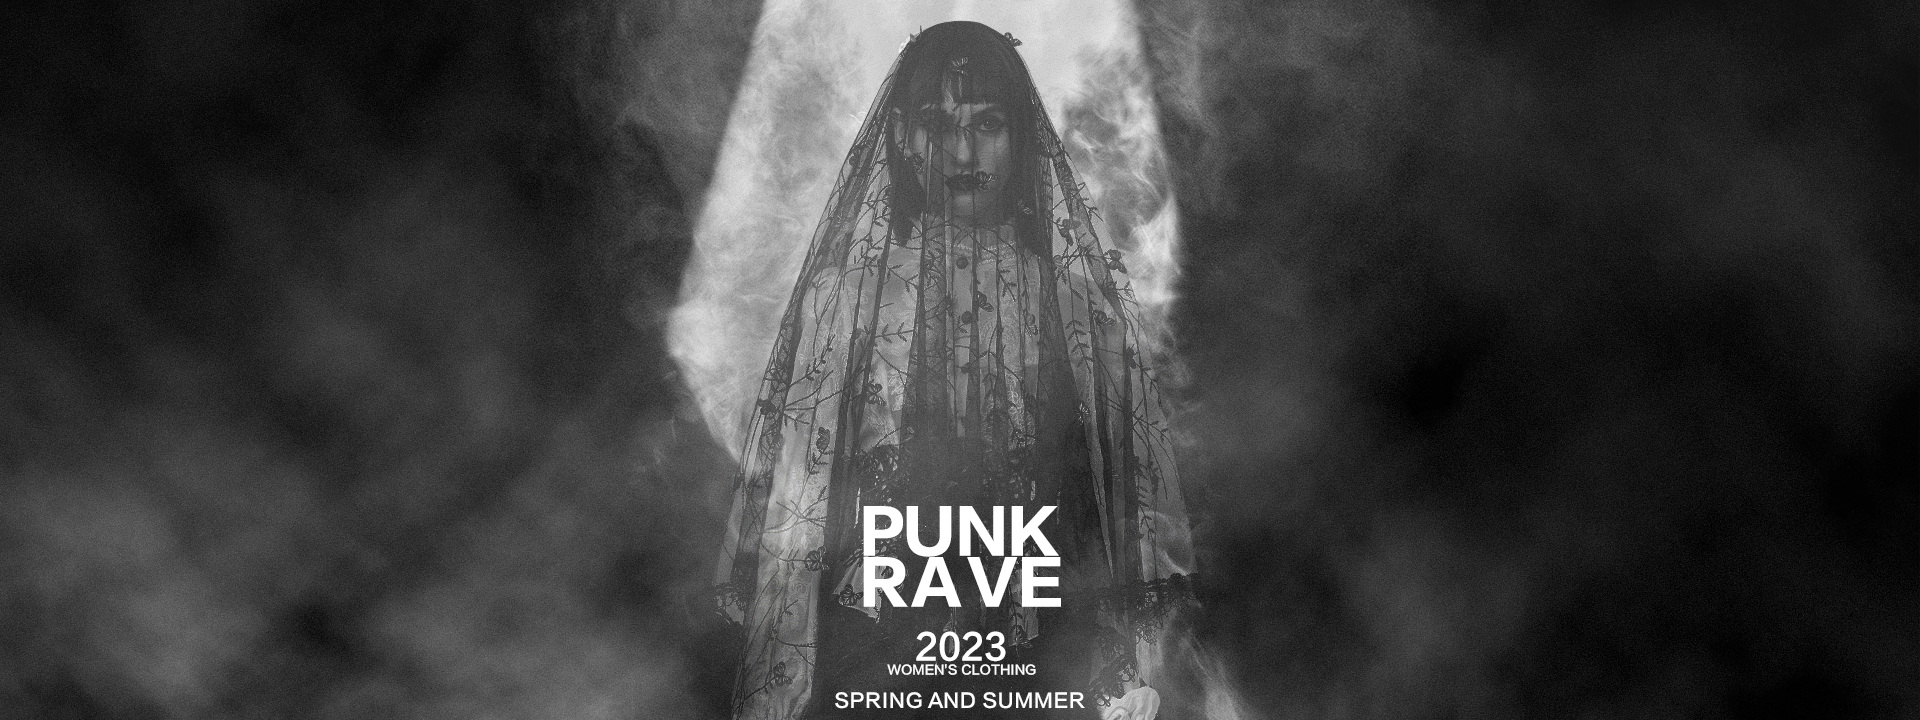 Punkrave 2023 Spring and Summer coming